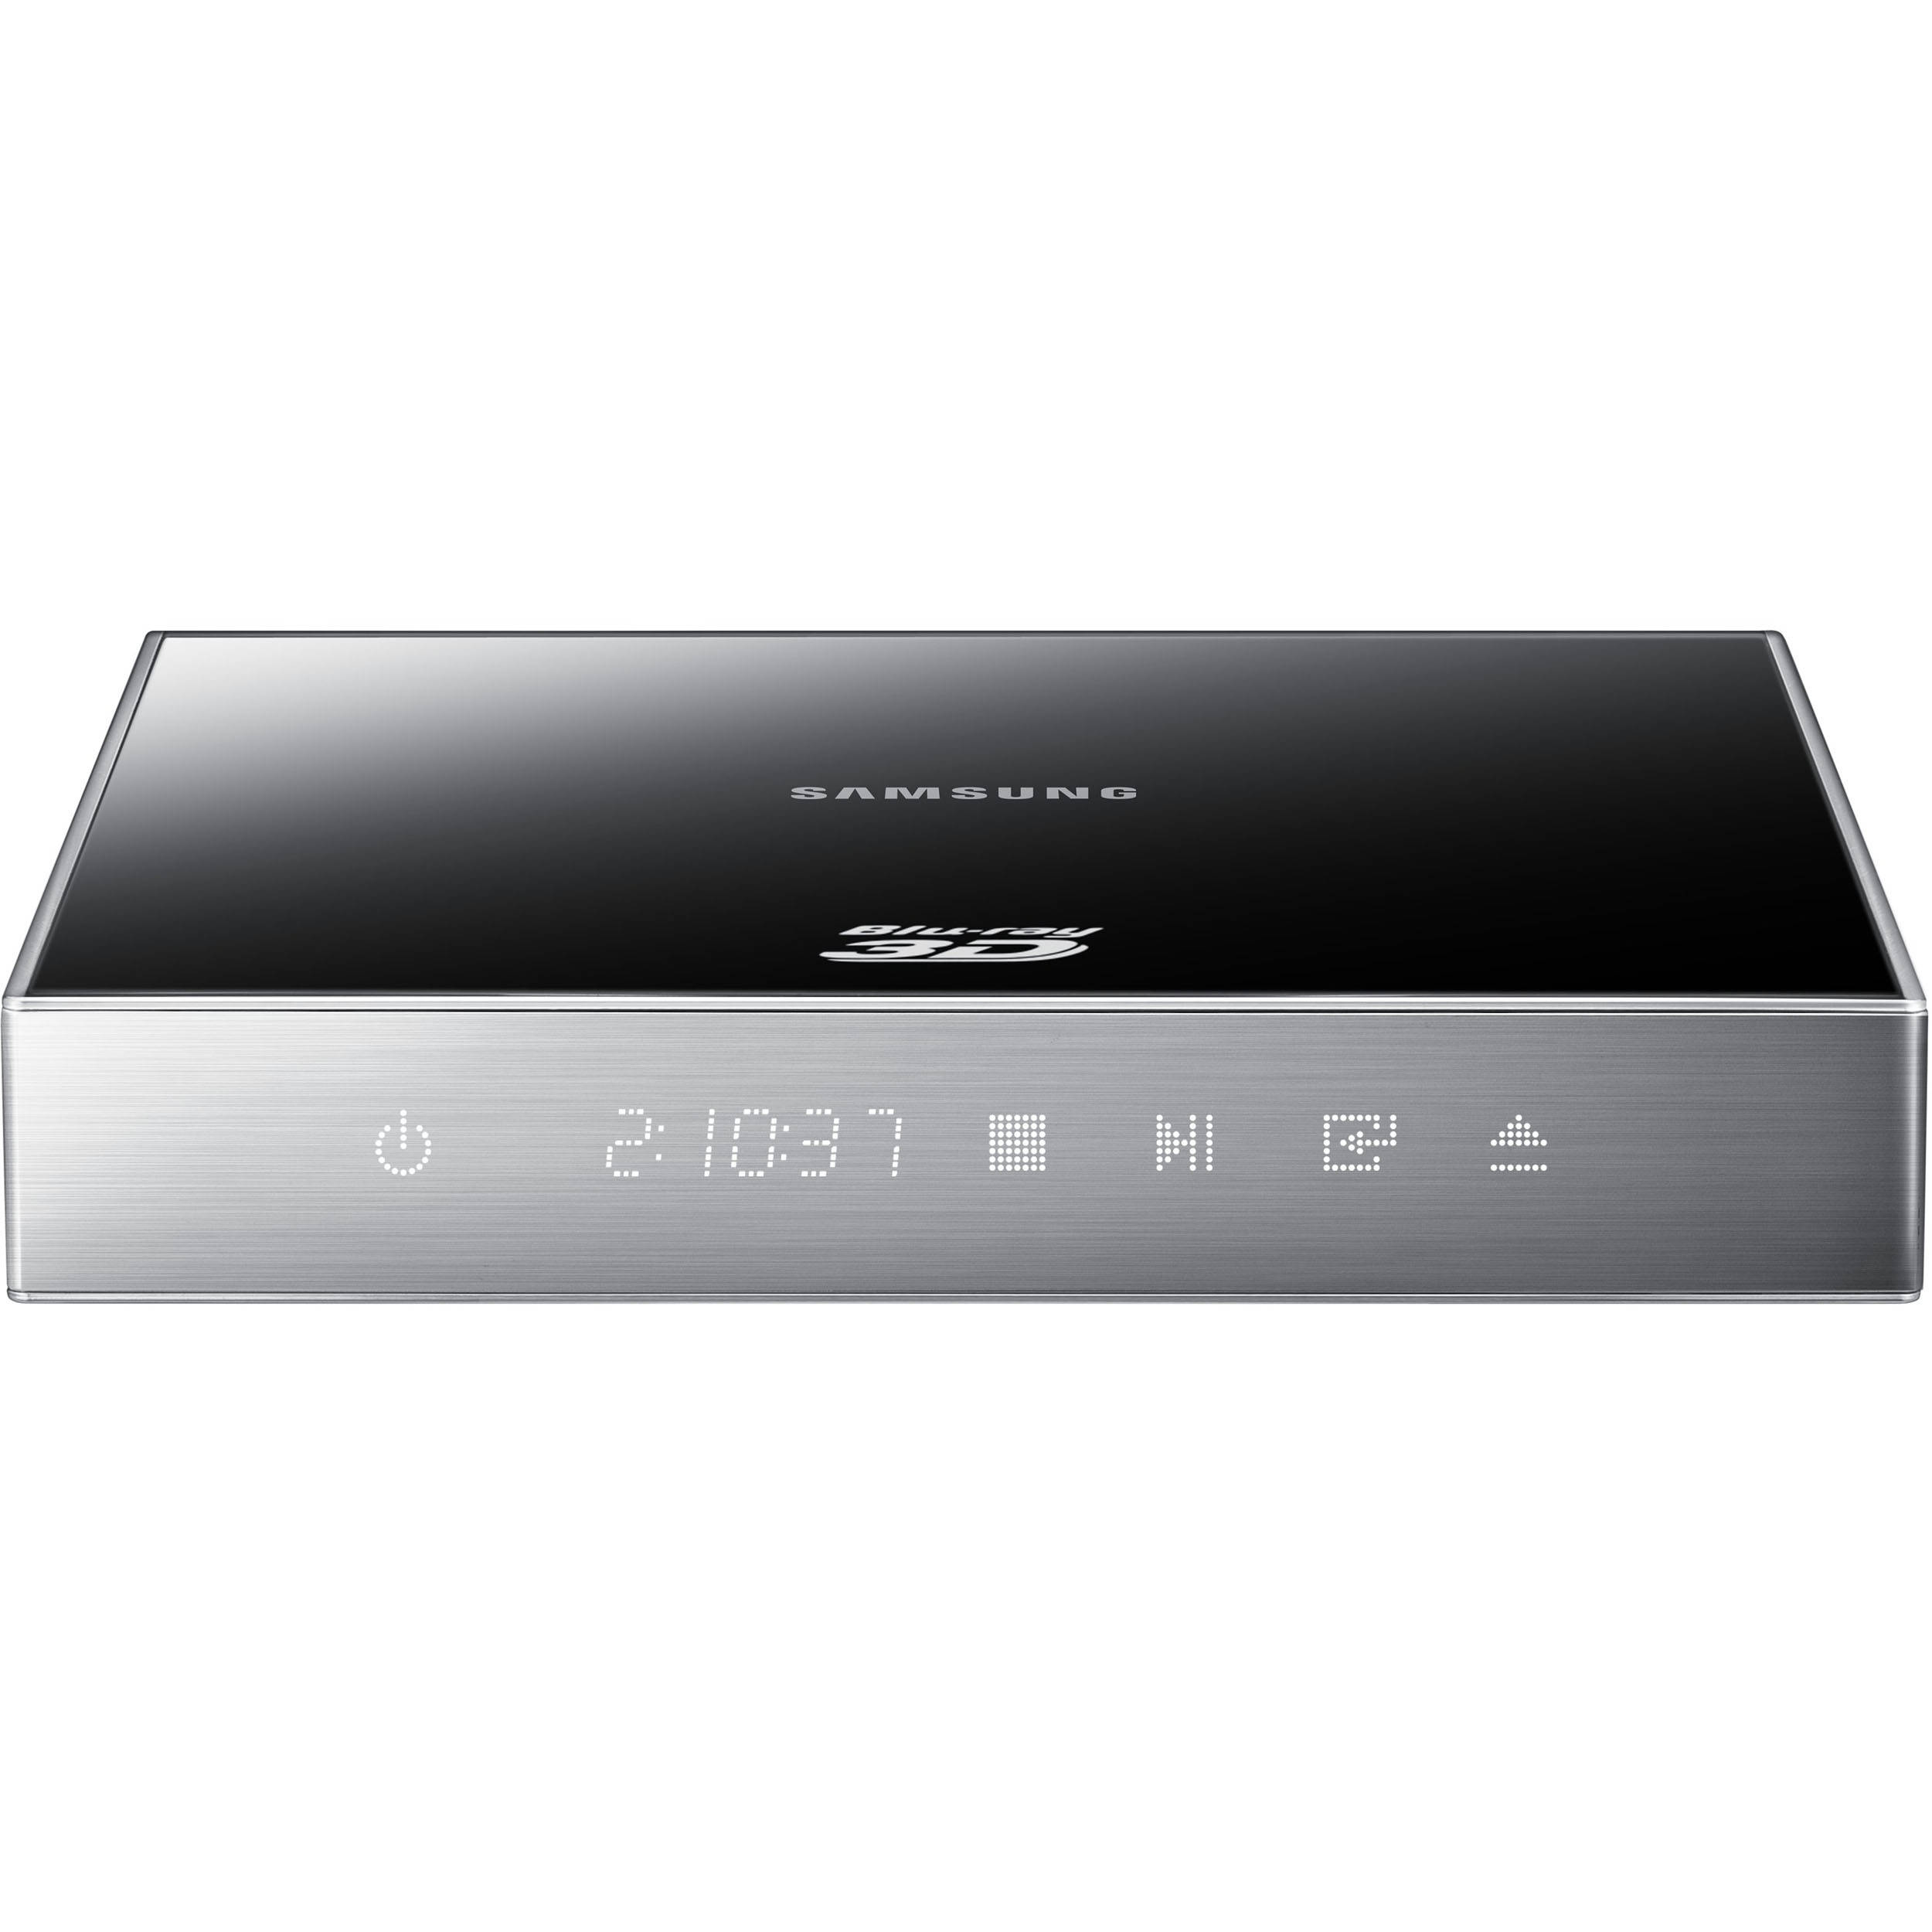 blu ray disk player for mac